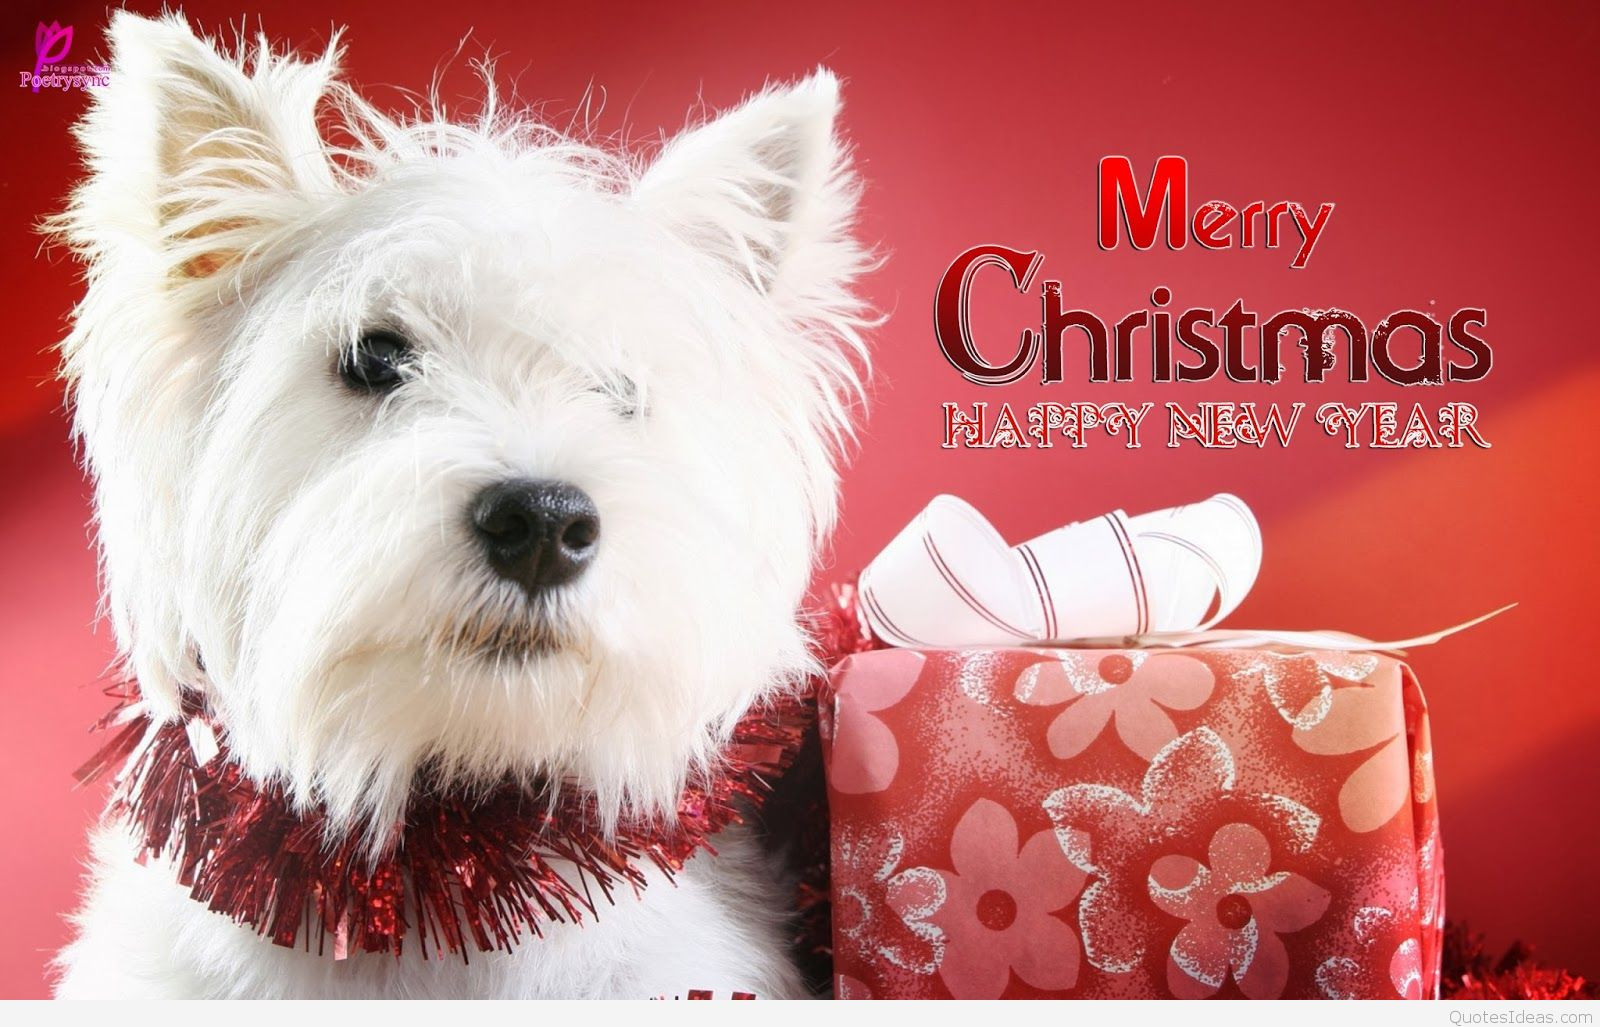 Dog Christmas Quotes
 Funny Merry Christmas Sayings Messages & Cartoons 2015